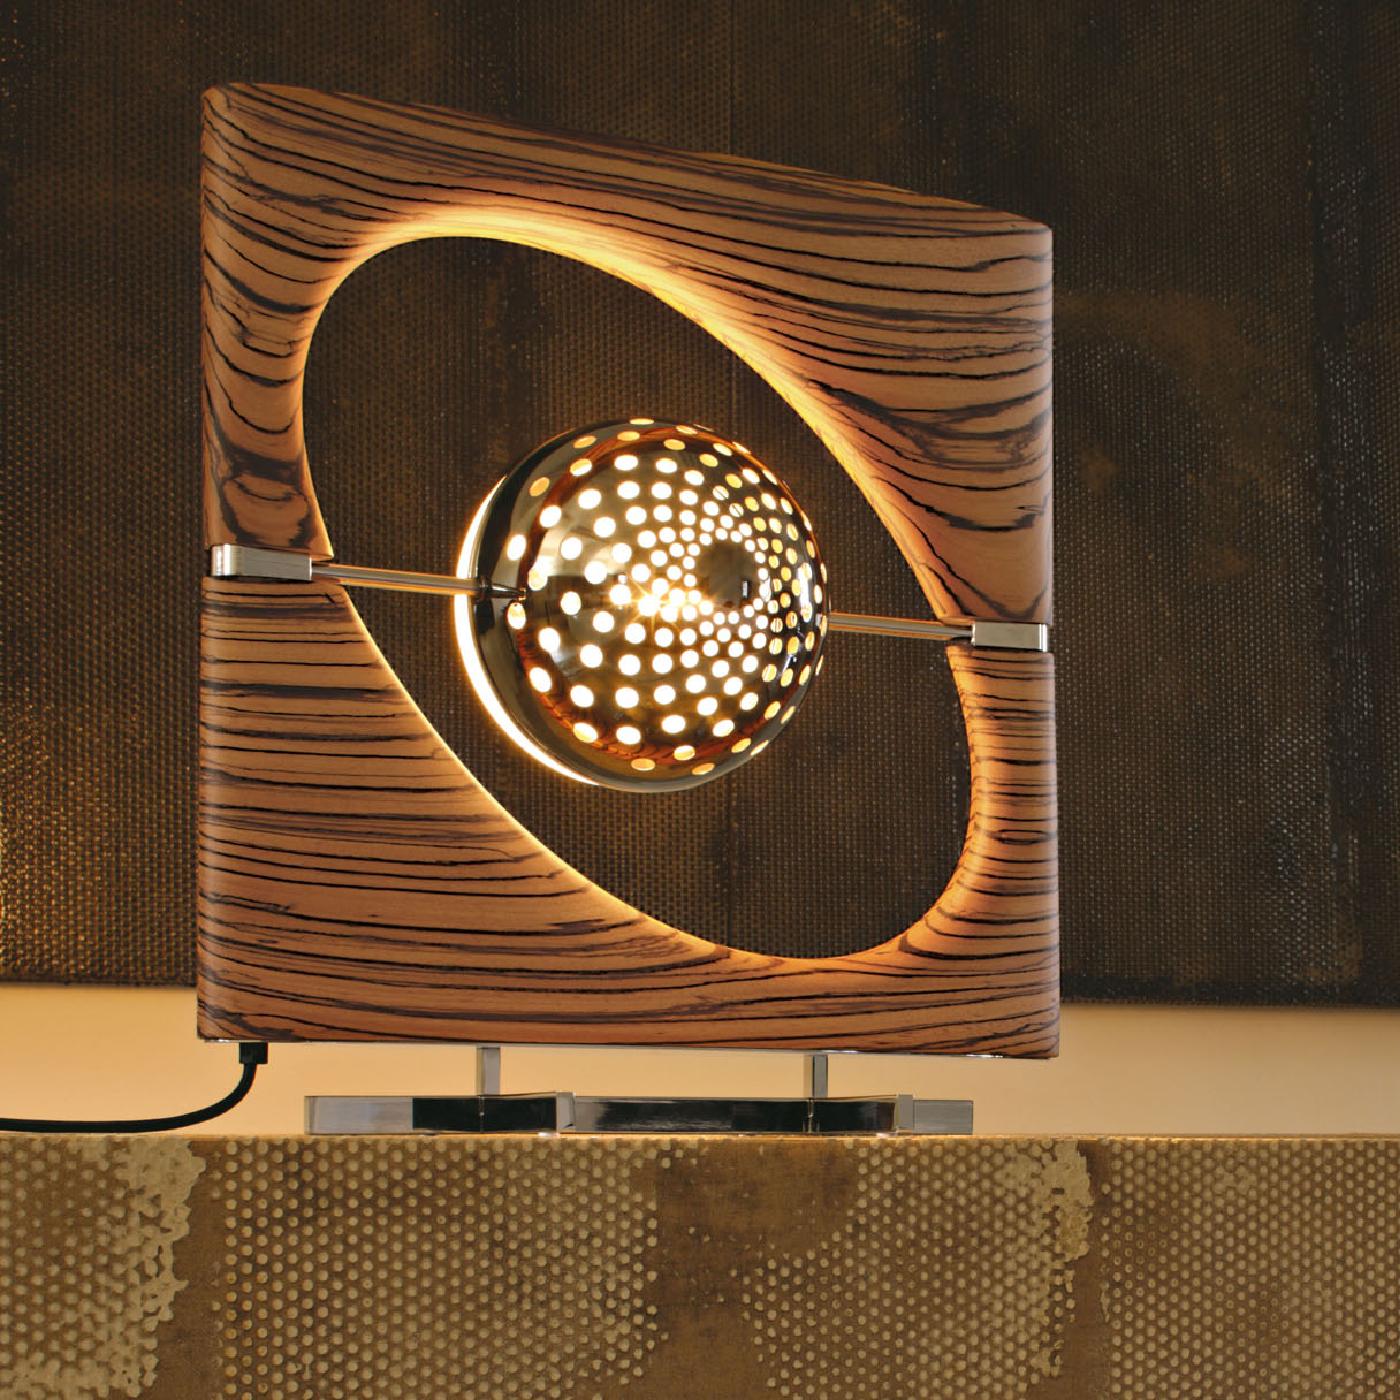 Each exquisite Sun Ra Zebrano table lamp features a frame of unique and decorative wood surrounding the chromium/brass plated and moulded acified white glass illuminating body in the center. The varying stripe patterns or small cracks and holes are